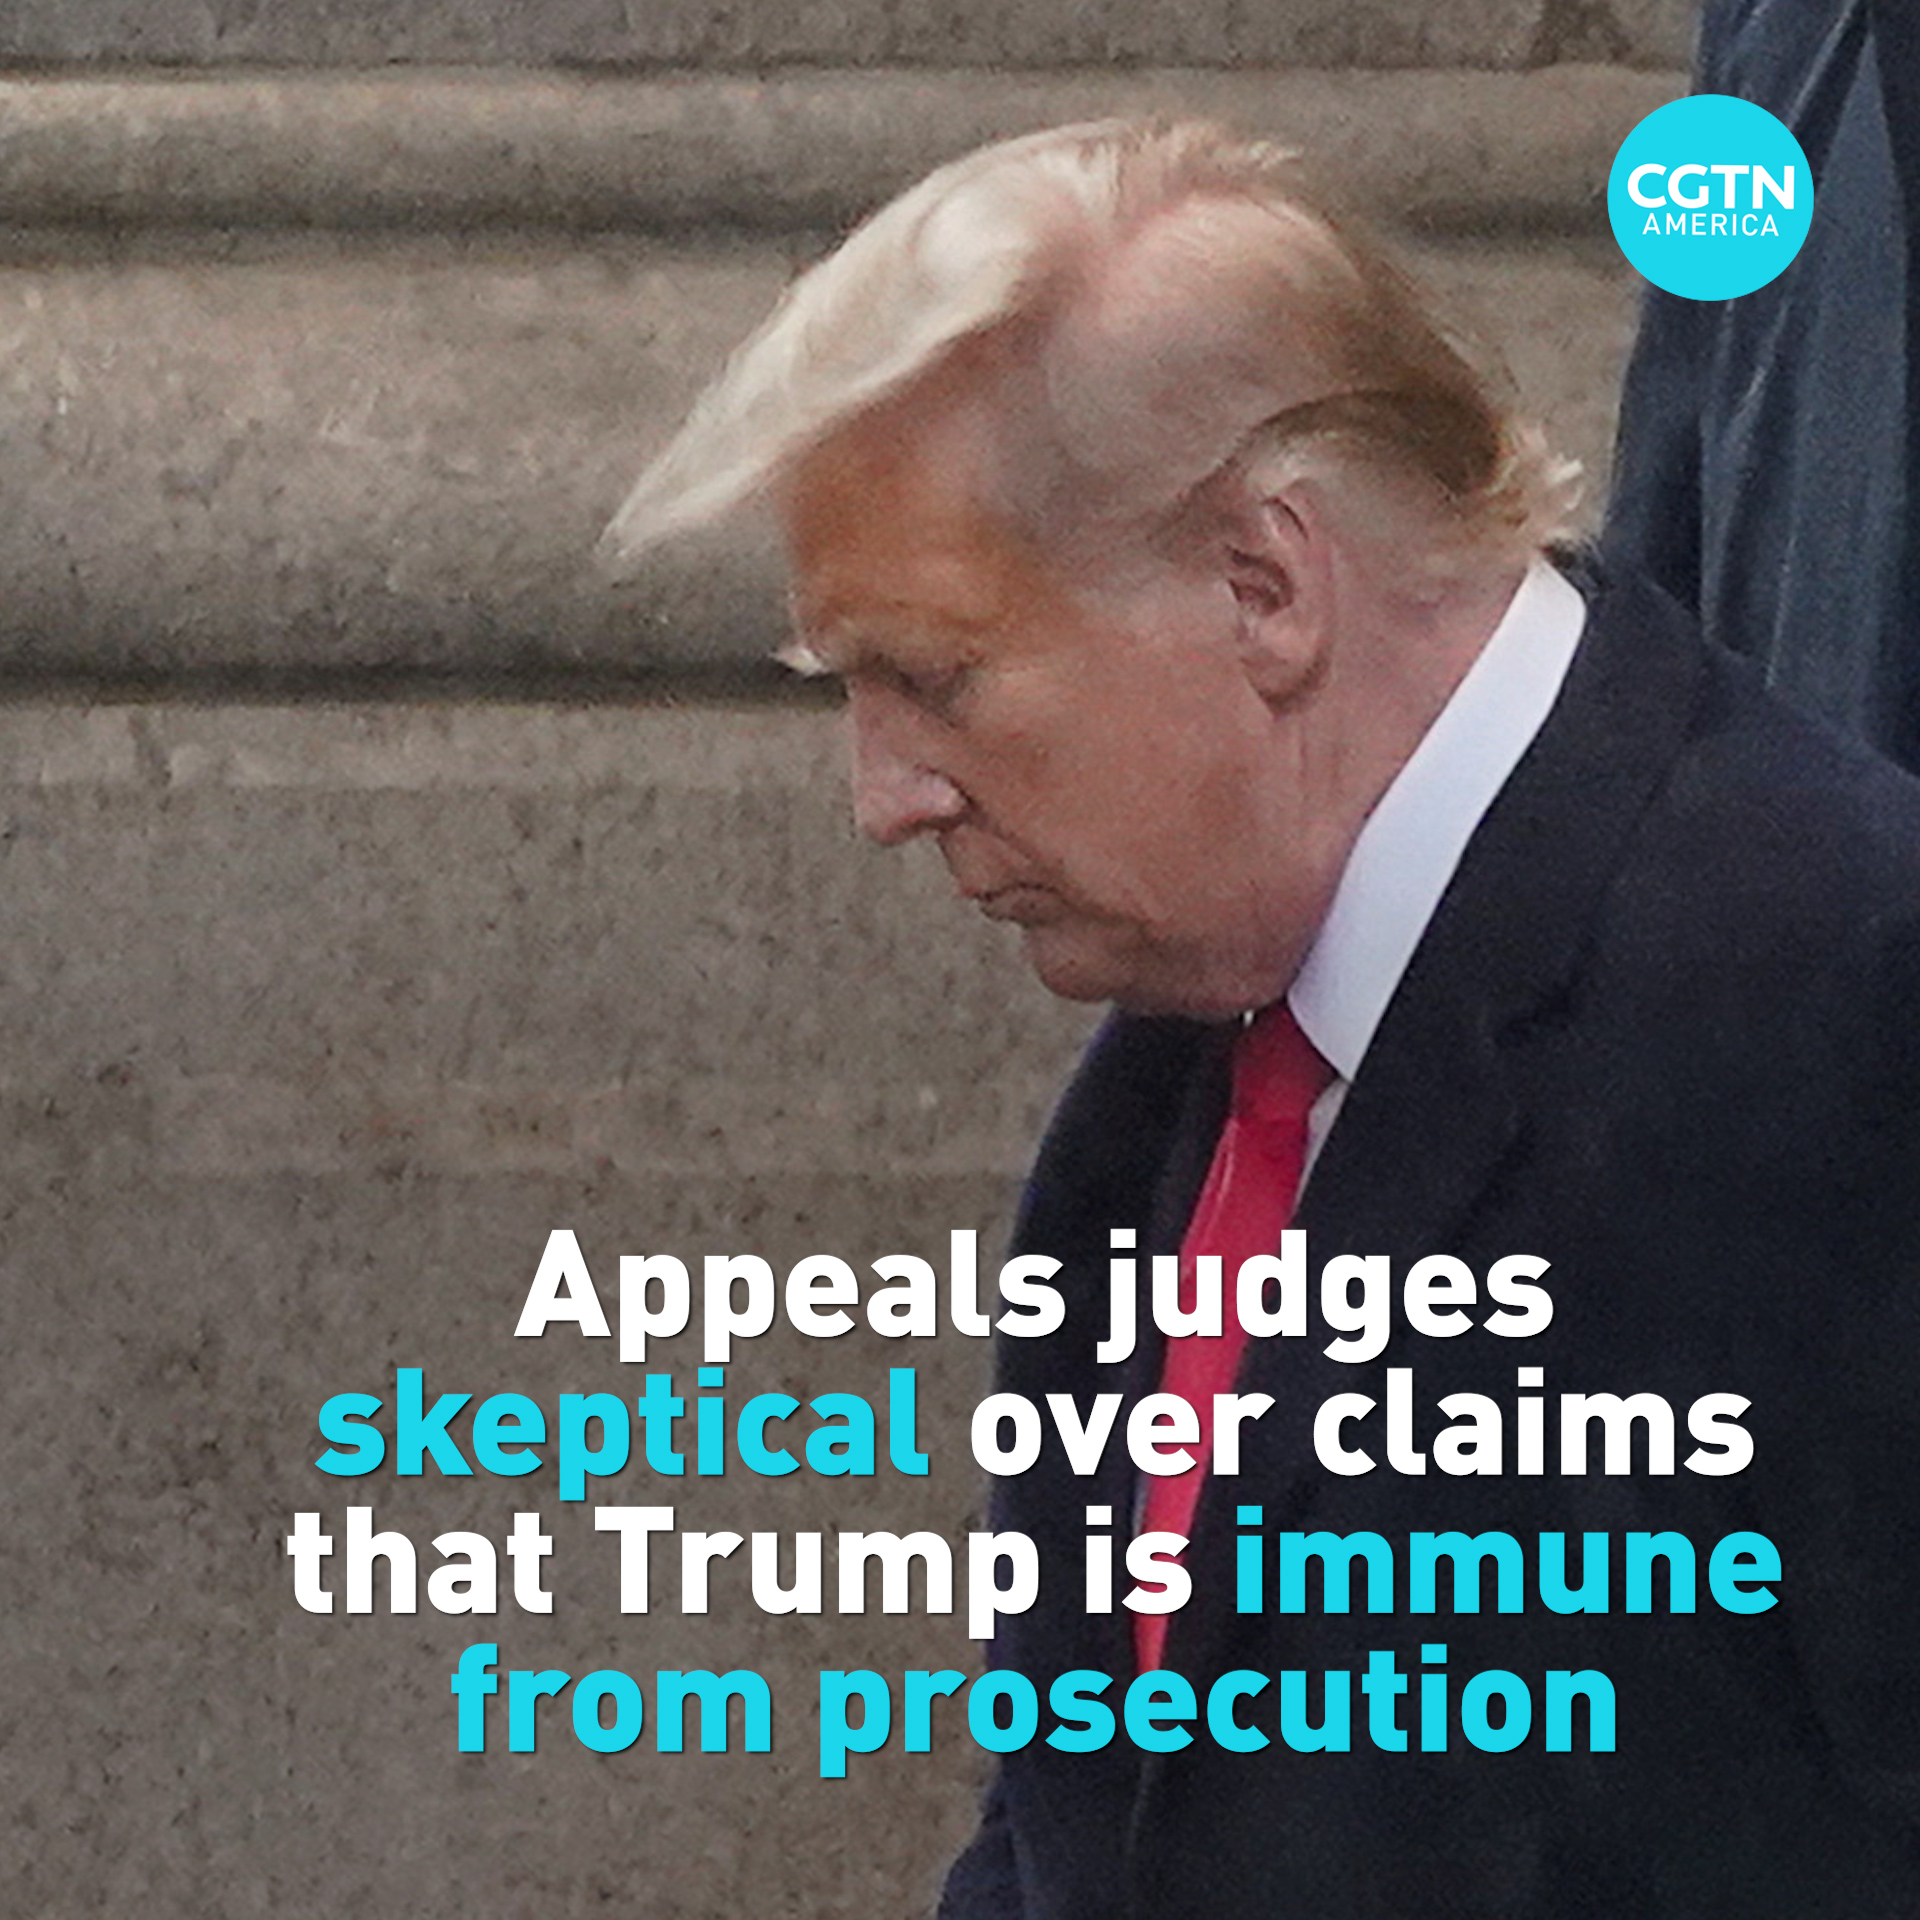 Is Donald Trump immune from prosecution?